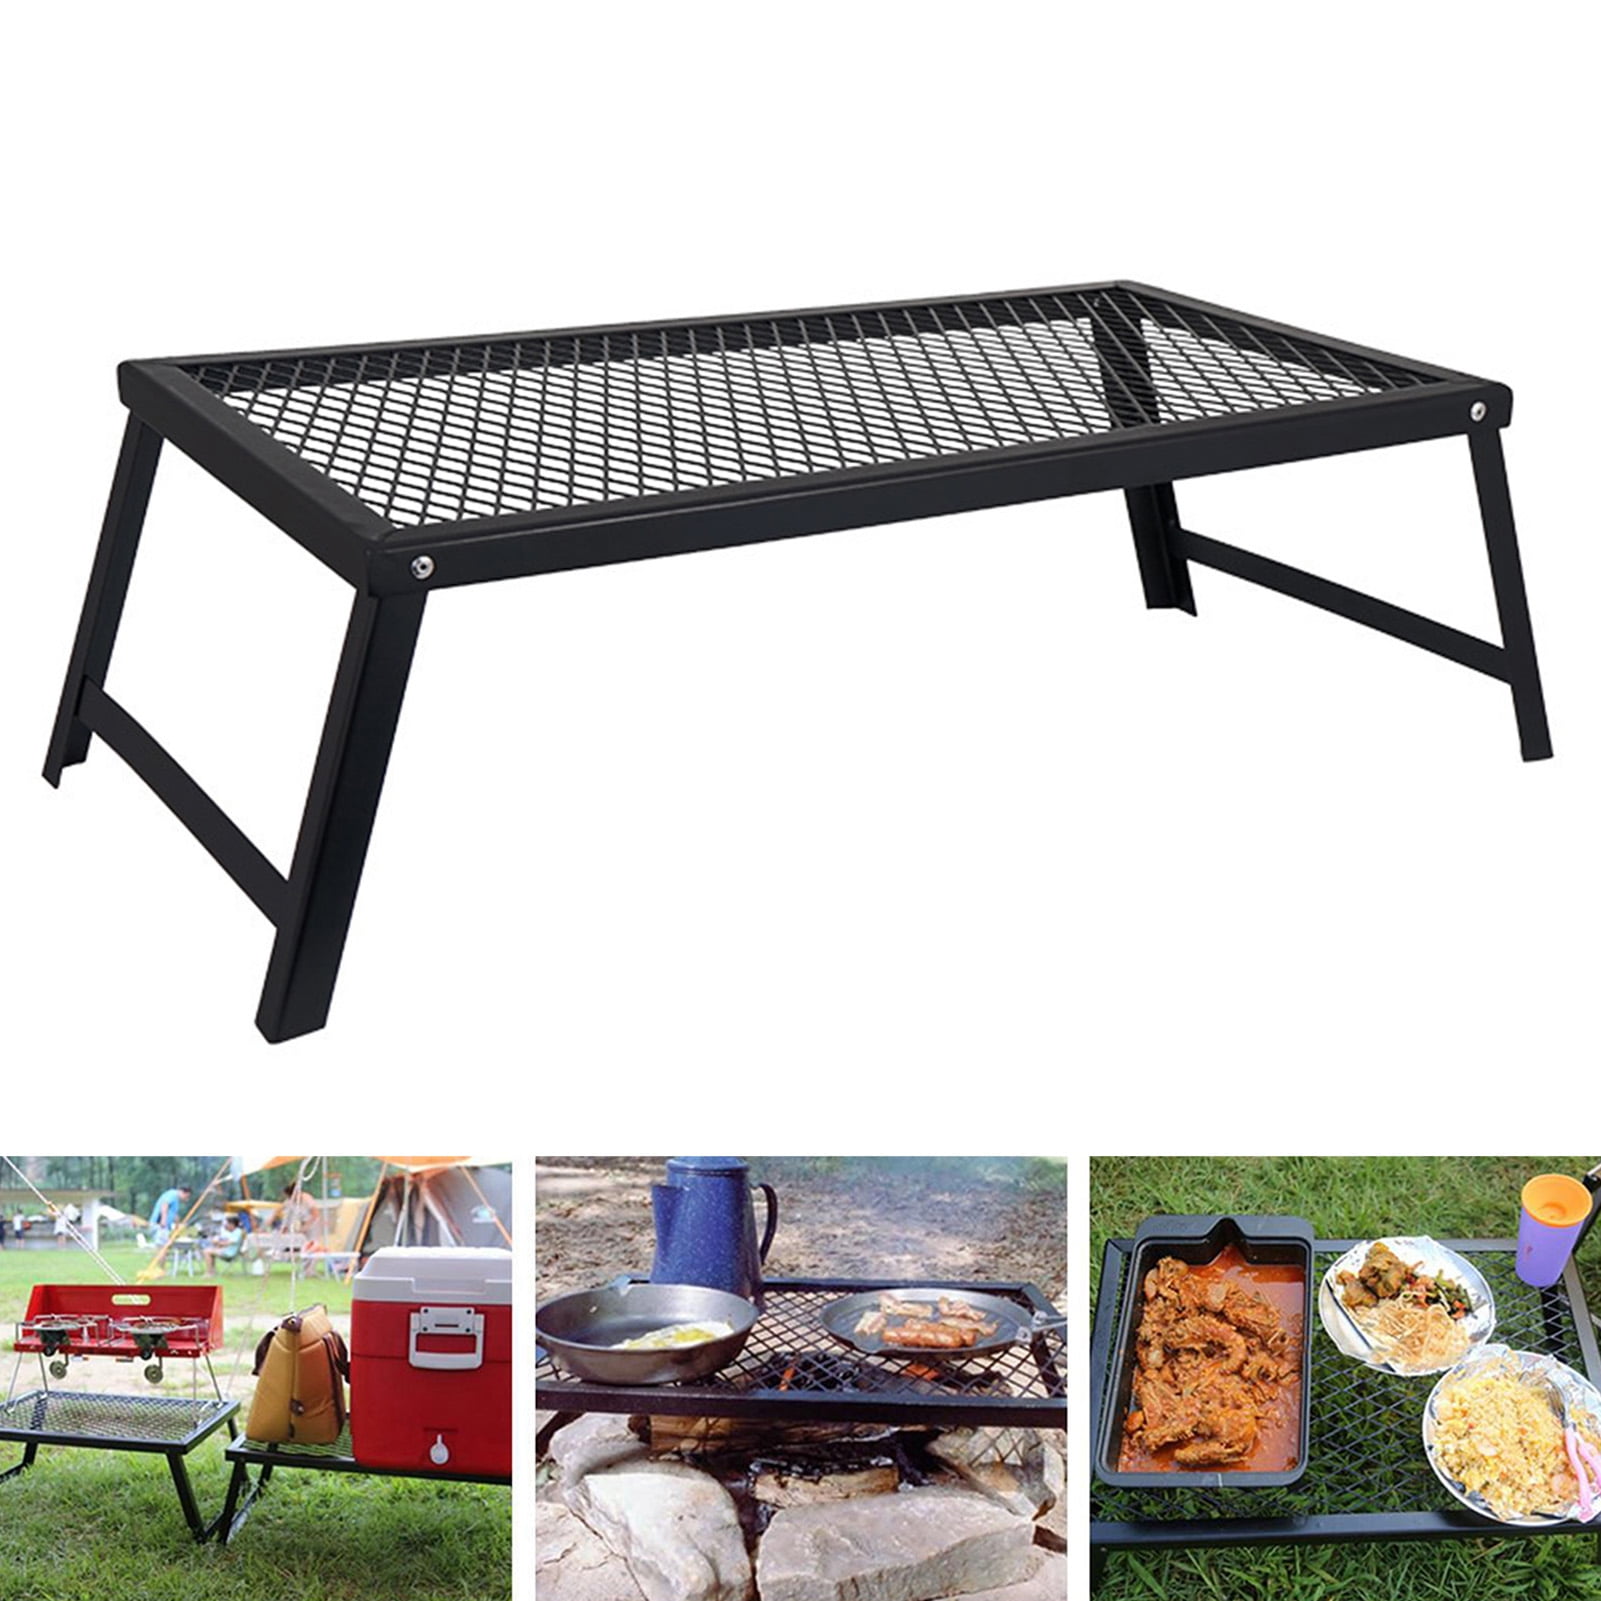 Foldable Camping Grill Portable BBQ Picnic Barbecue Outdoor Campfire Grill US